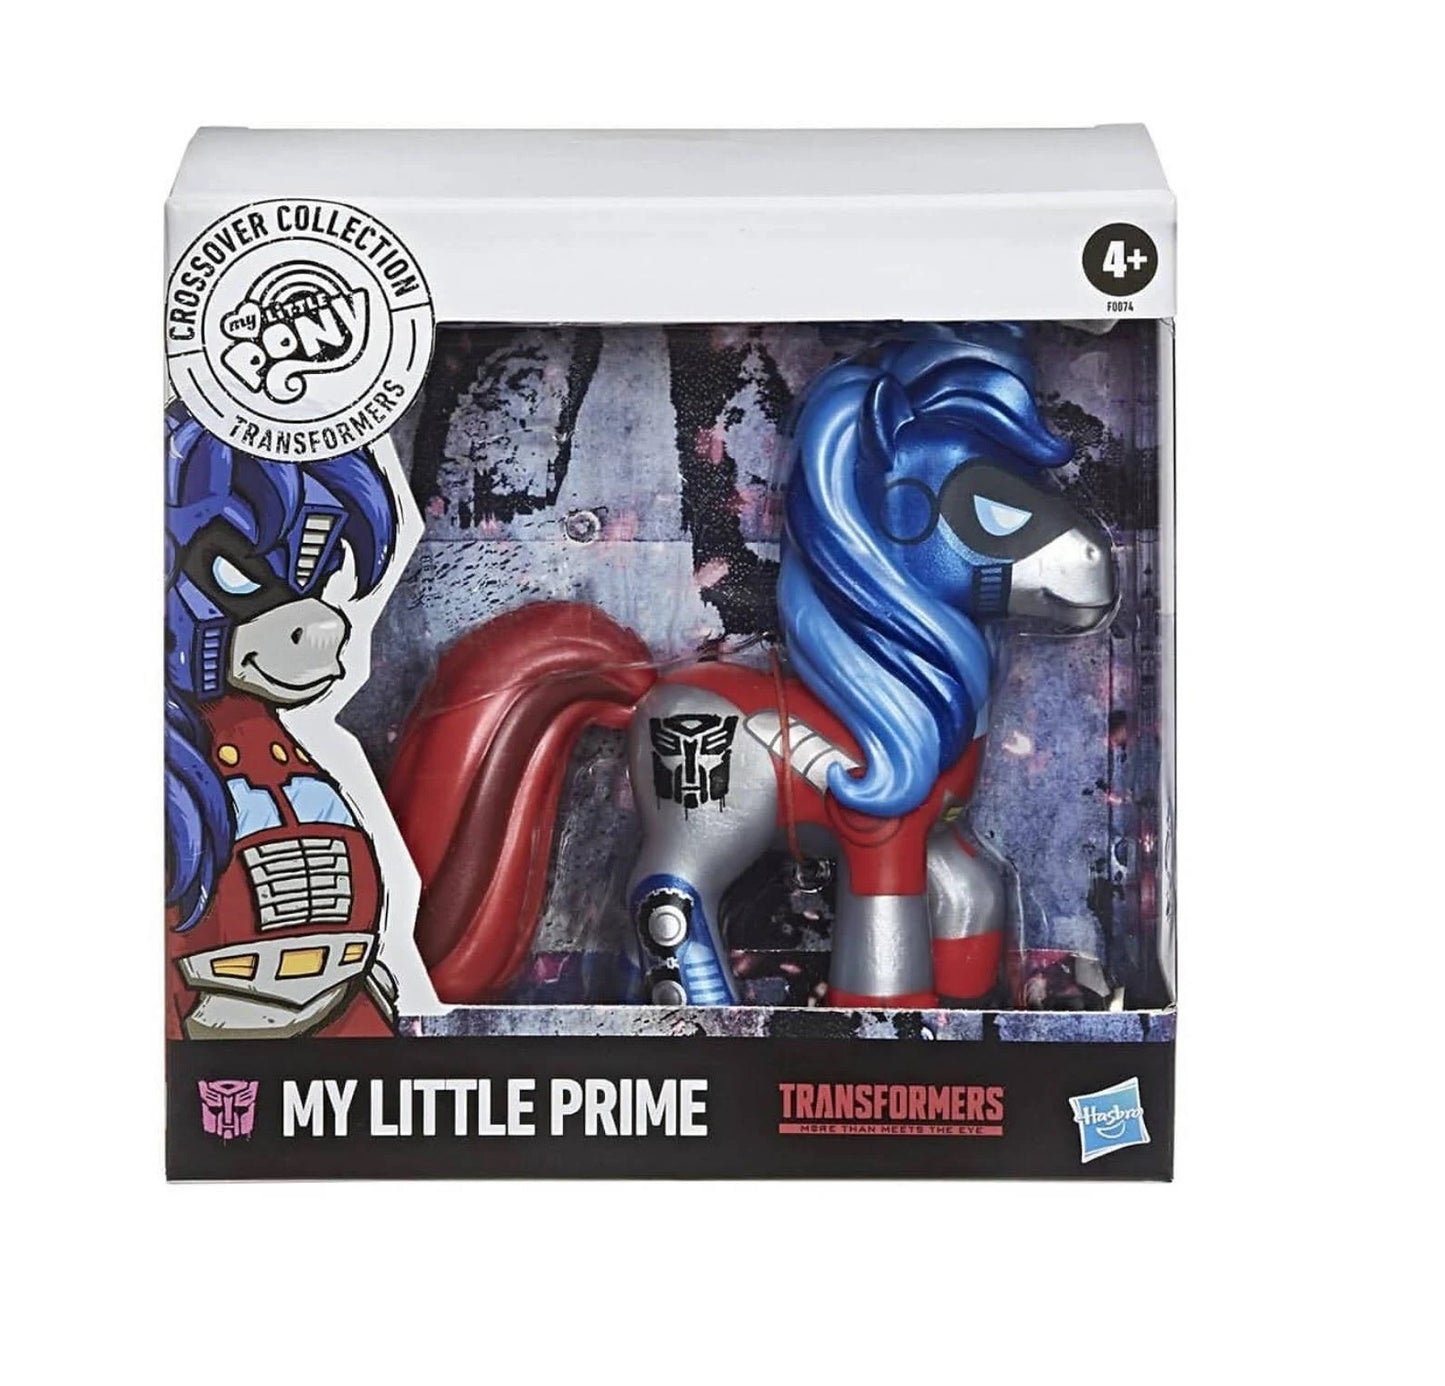 My Little Pony Transformers Crossover Collection "My Little Prime"